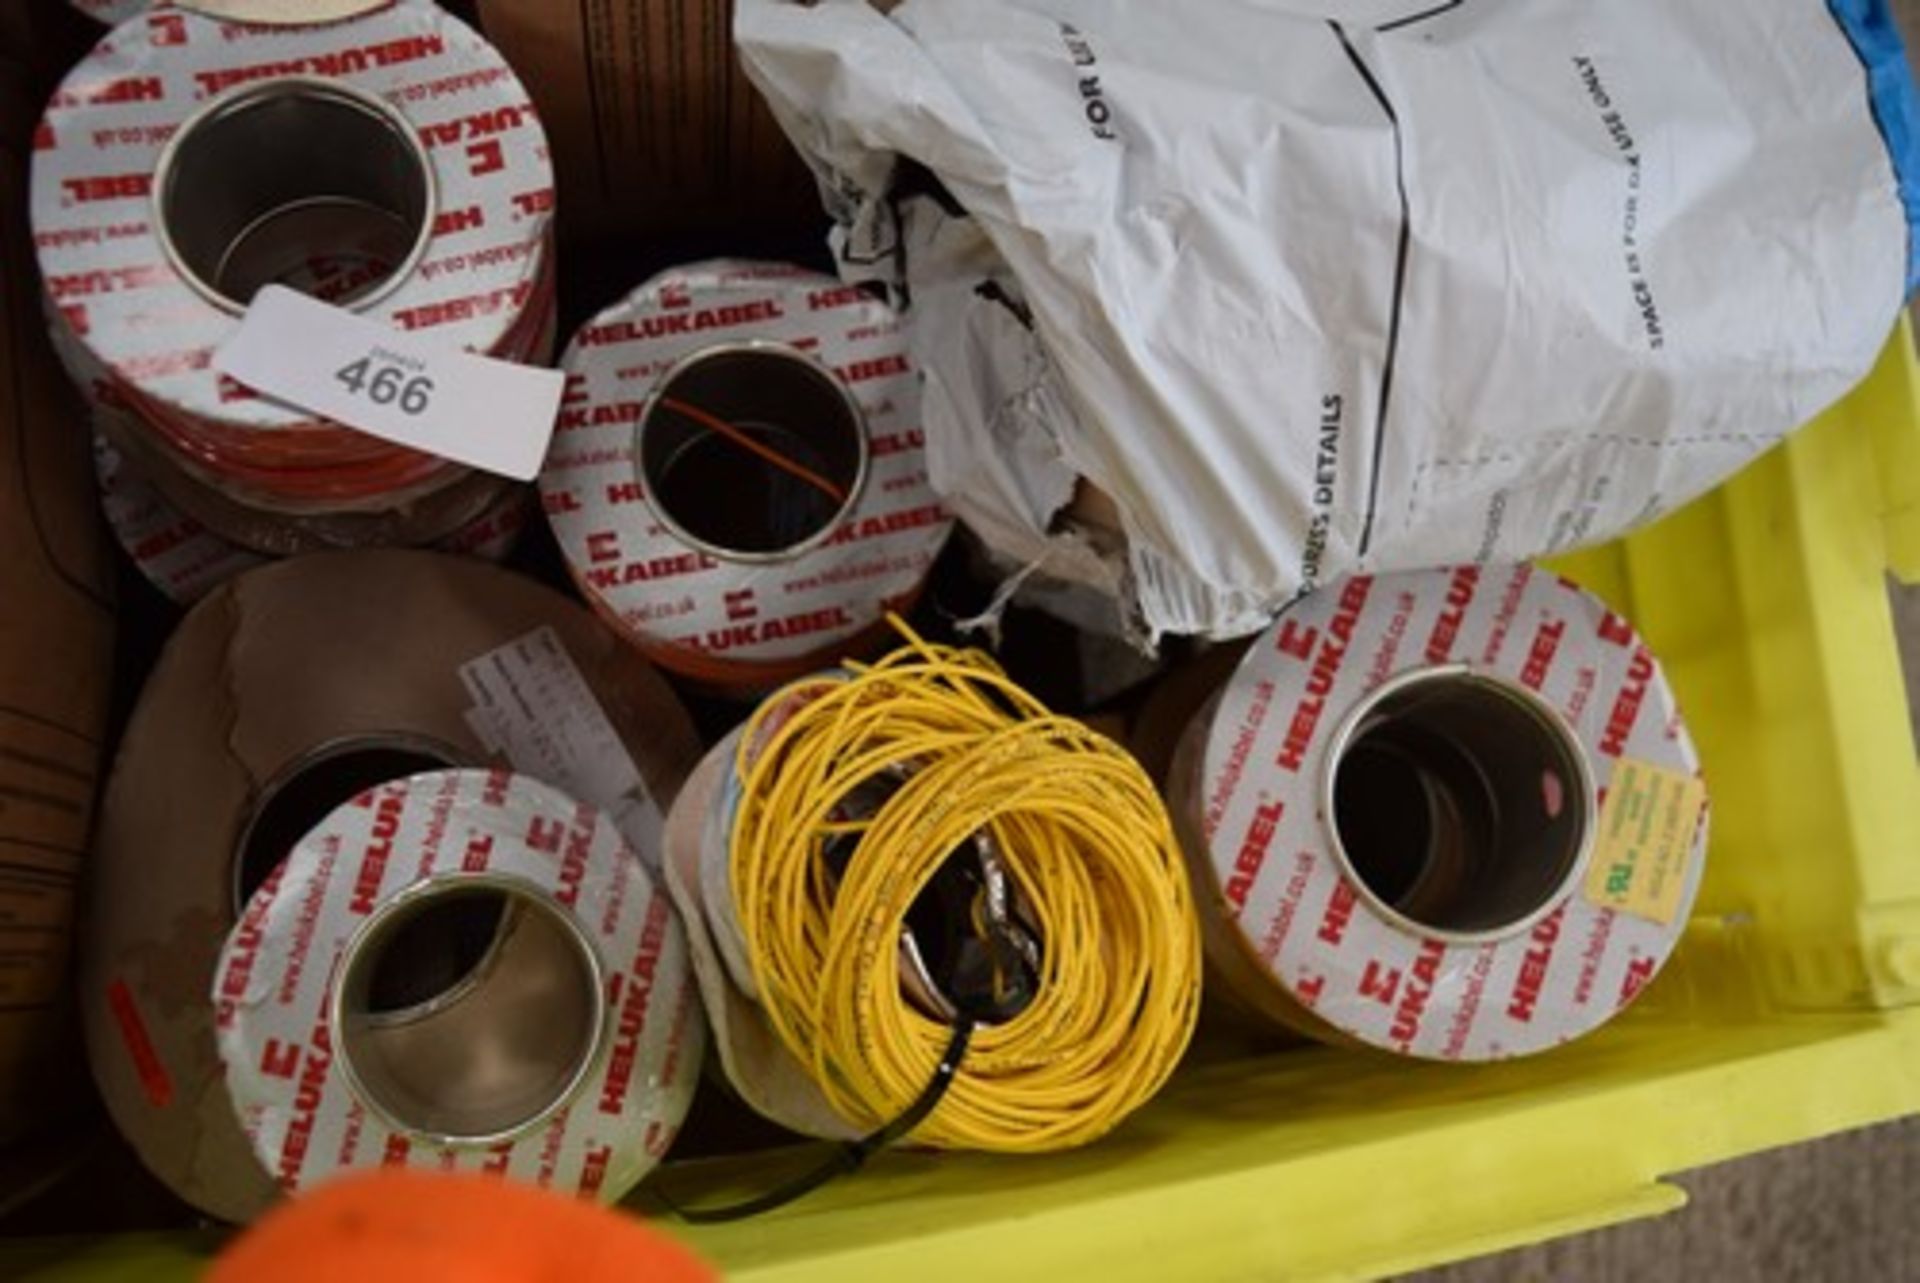 A selection of wiring, including Helukabel 0.75mm PVC wire, Top Cable 2.5mm appliance wire, etc. -